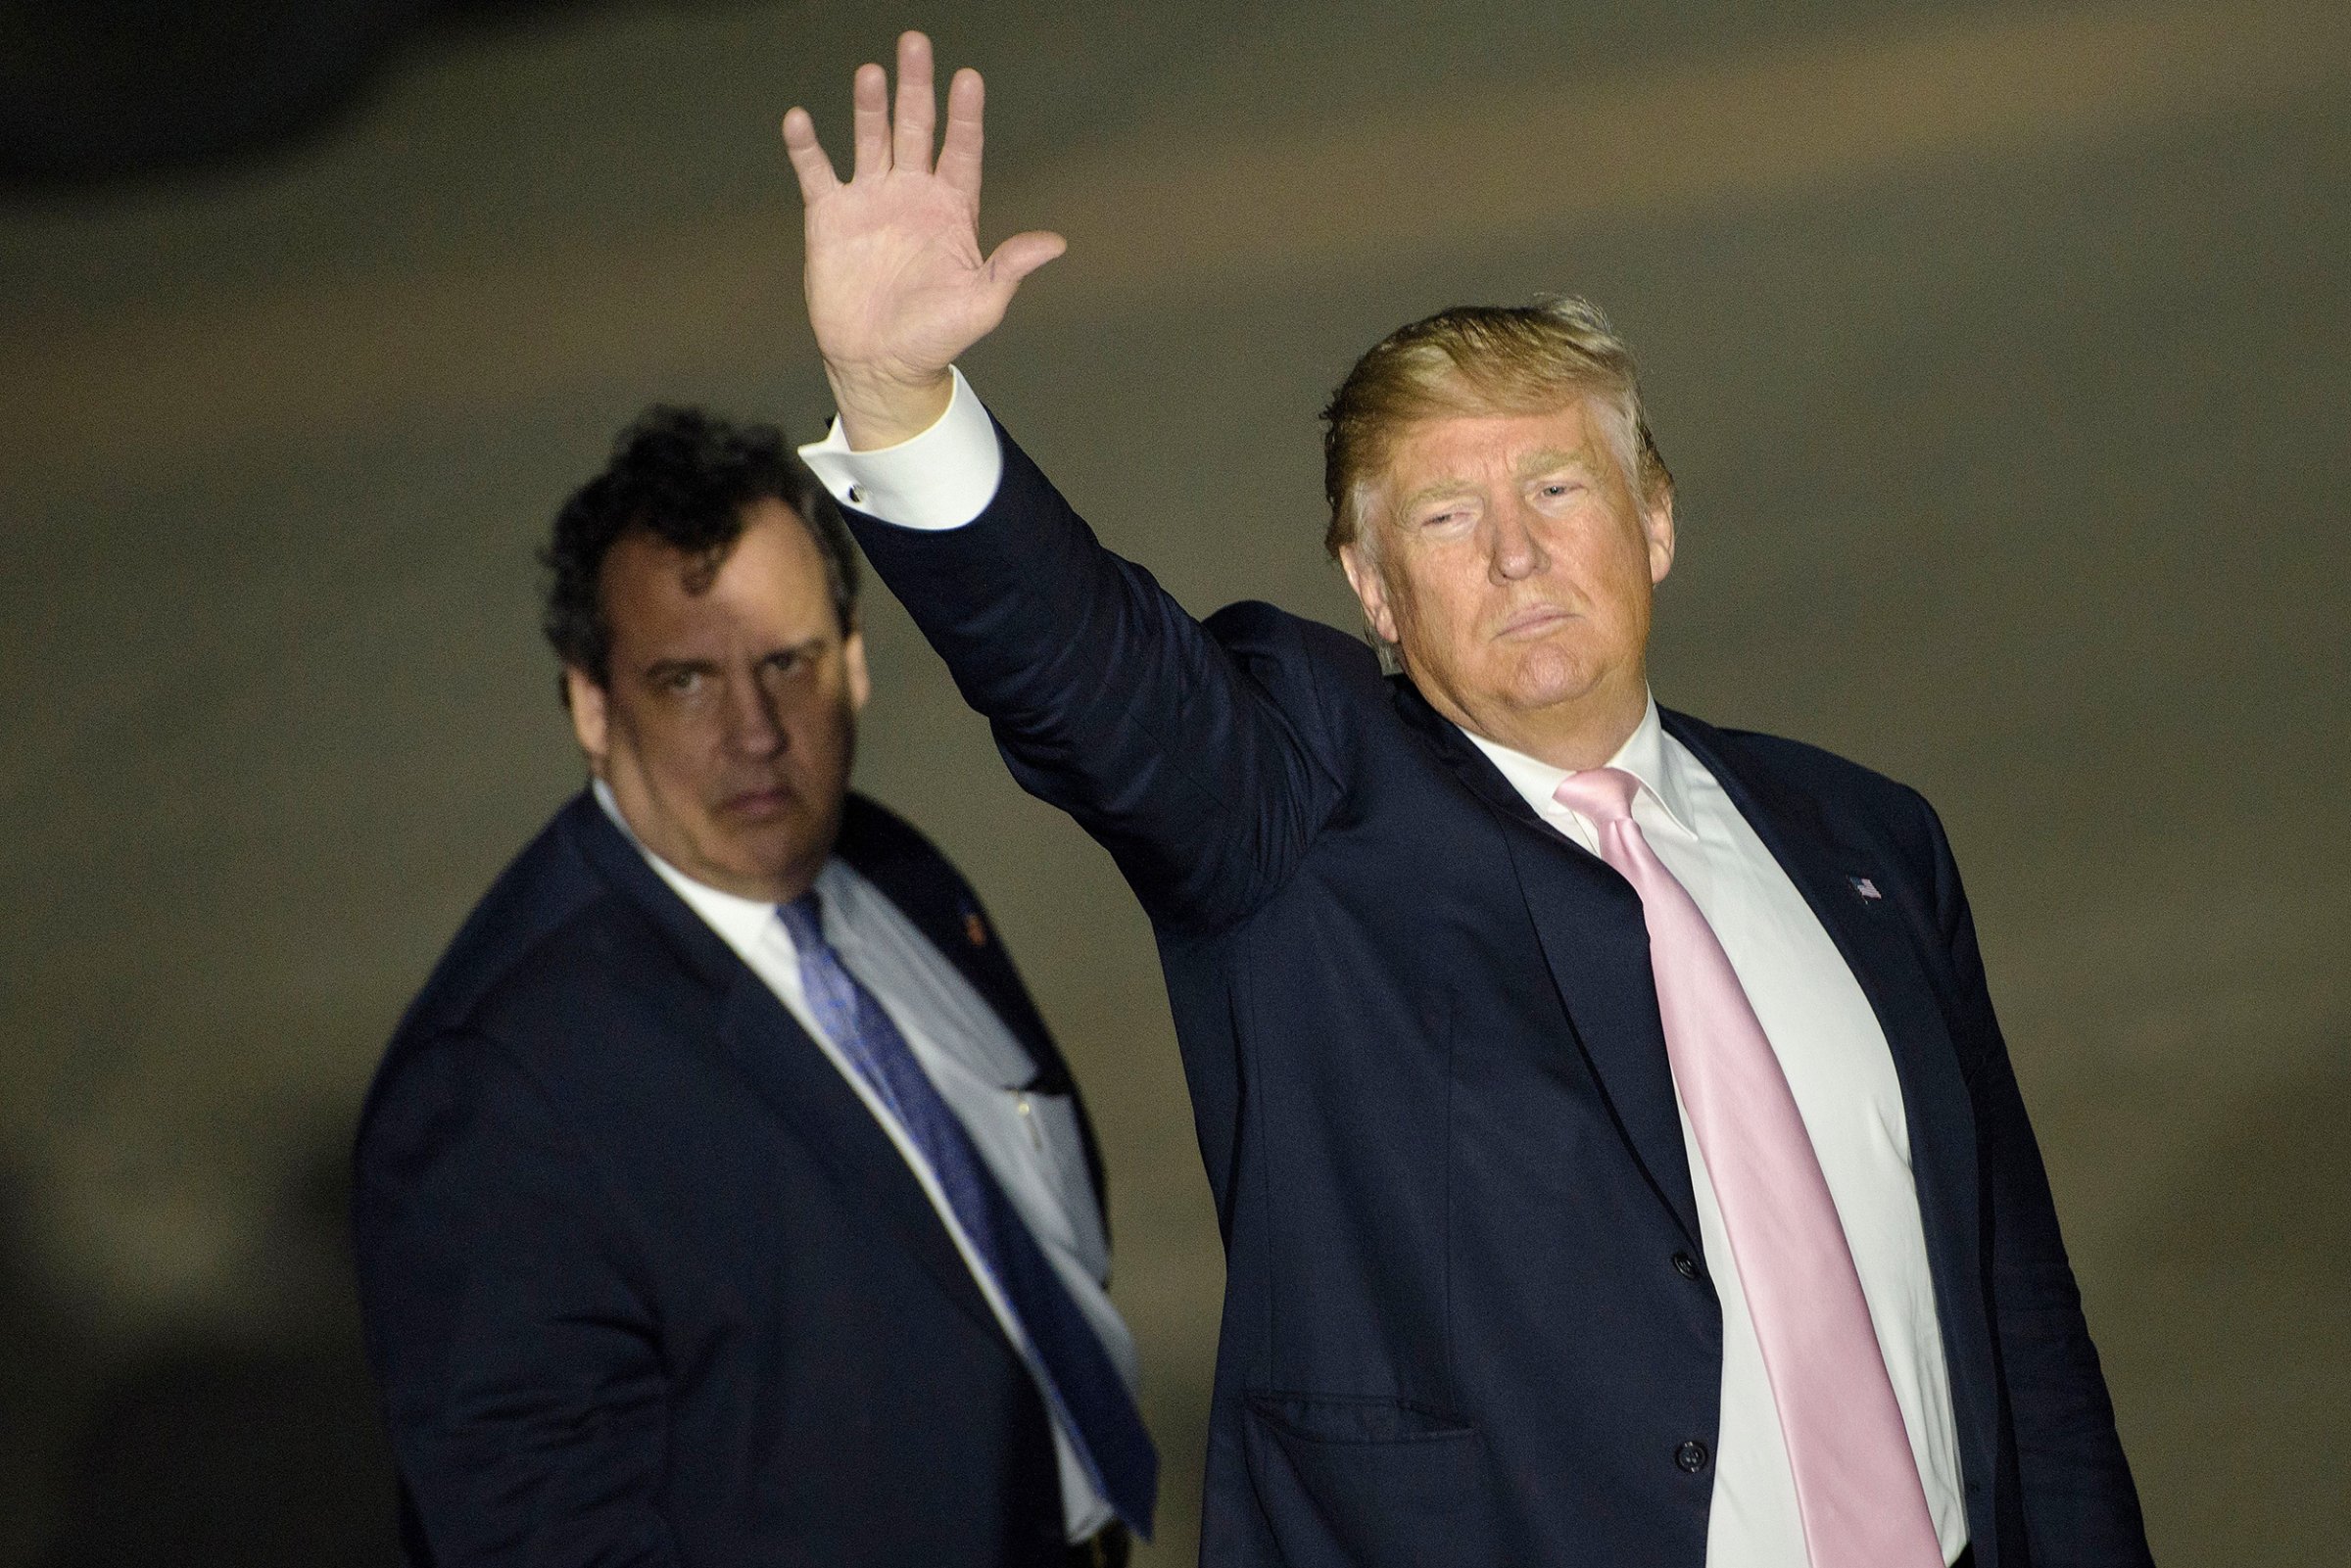 Chris Christie and Donald Trump depart a rally in Vienna Center, Ohio, on March 14, 2016.